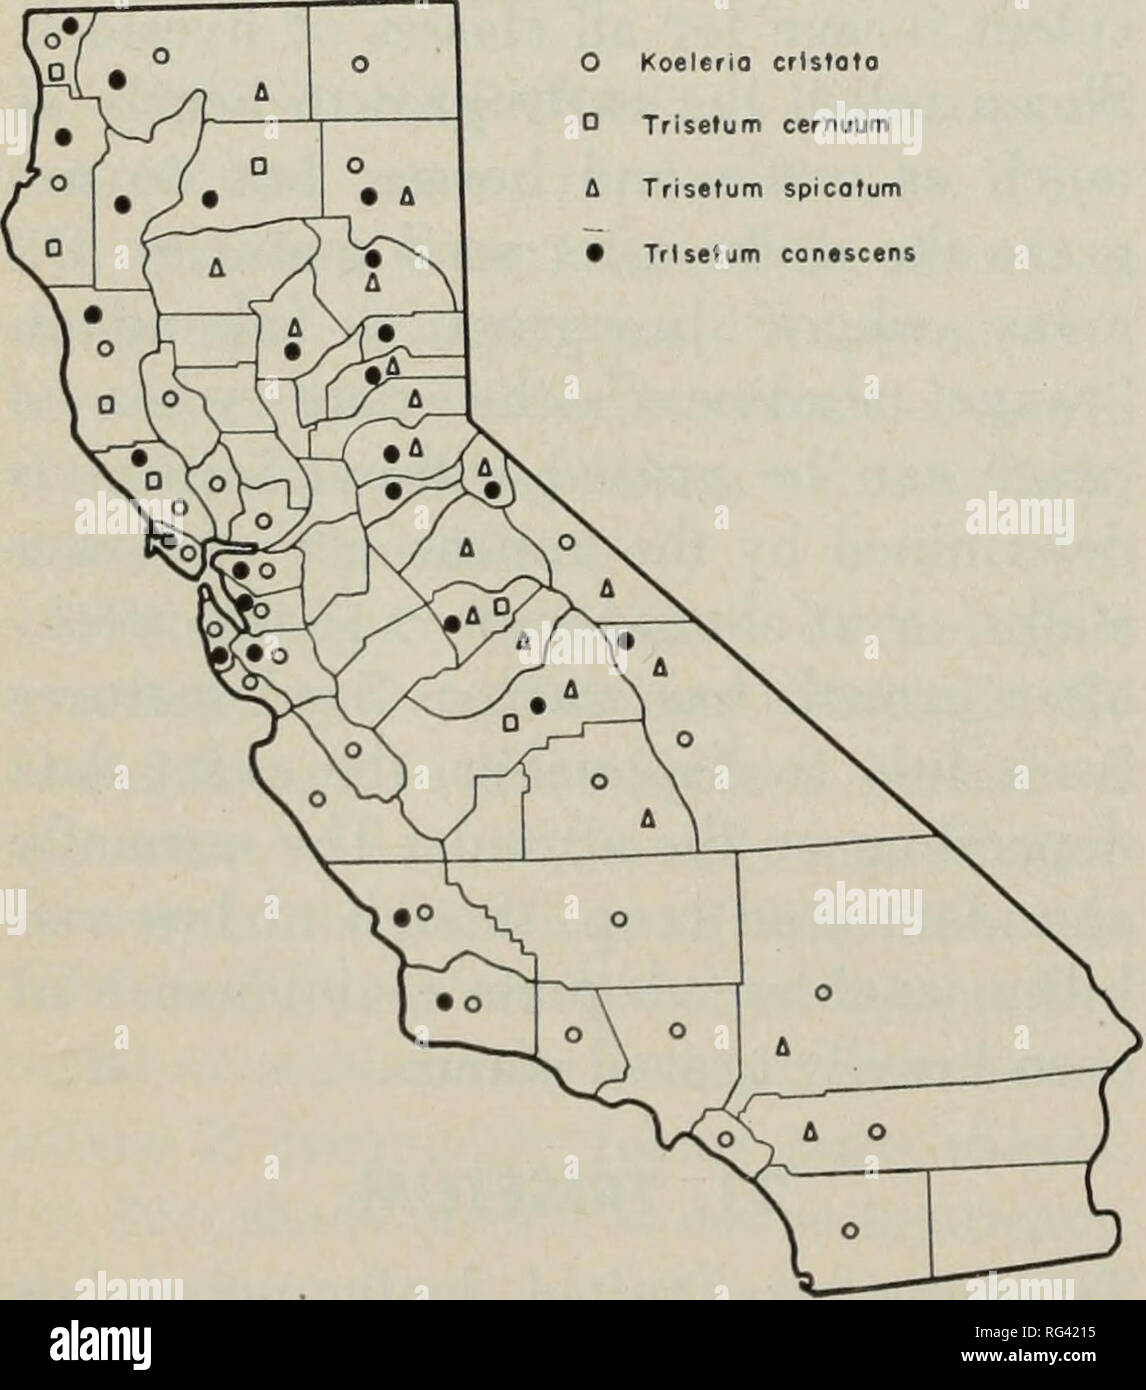 . California grasslands and range forage grasses. Grasses; Forage plants. middle. Of the five trisetums in Cali- fornia only two species—nodding trise- tum and spike trisetum—are abundant enough to be important forage produc- ers. (Fig. 71.) Key to Species Panicle dense, spikelike 1. T. spicatum Panicle loose, open and nodding Panicle relatively few-flowered, lax or droop- ing; florets distant 2. T. cernuum Panicle many-flowered; florets not distant 3. T. canescens 1. SPIKE TRISETUM (Trisetum spicatum) is densely tufted with abundant basal foliage; culms 8-20 in (20-45 cm) tall; panicle 2-4% i Stock Photo